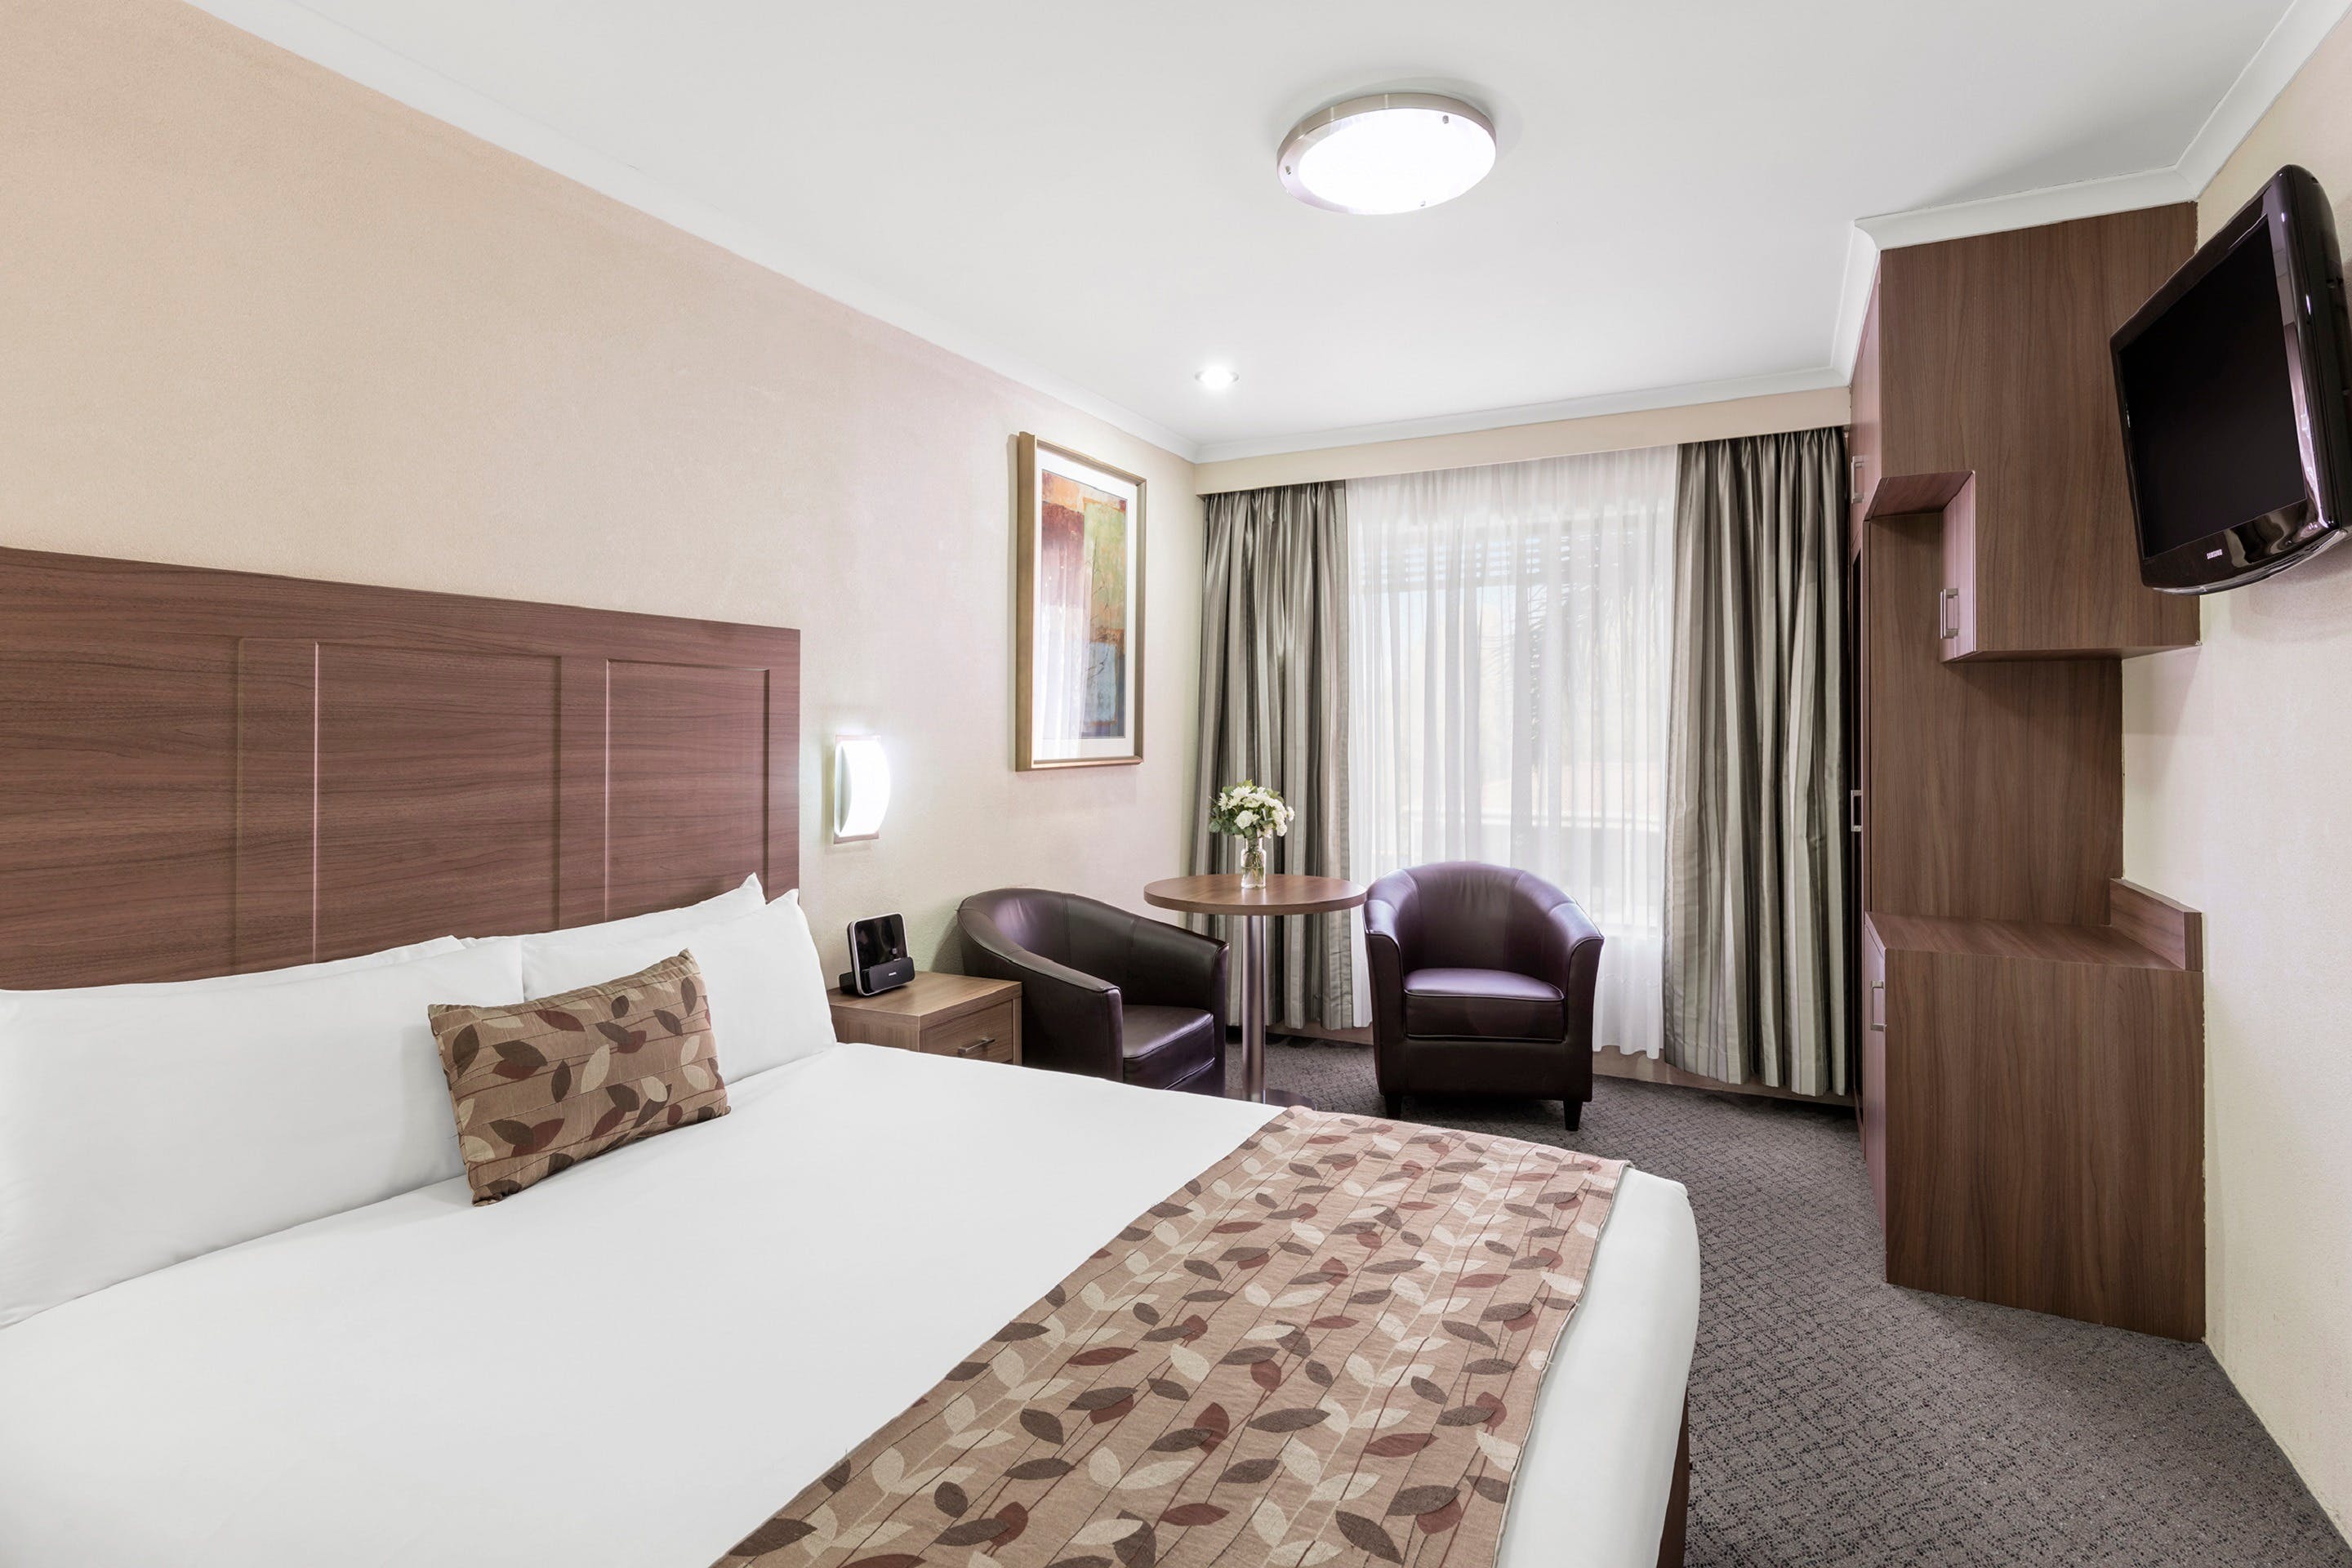 Garden City Hotel BW Signature Collection - Accommodation in Surfers Paradise